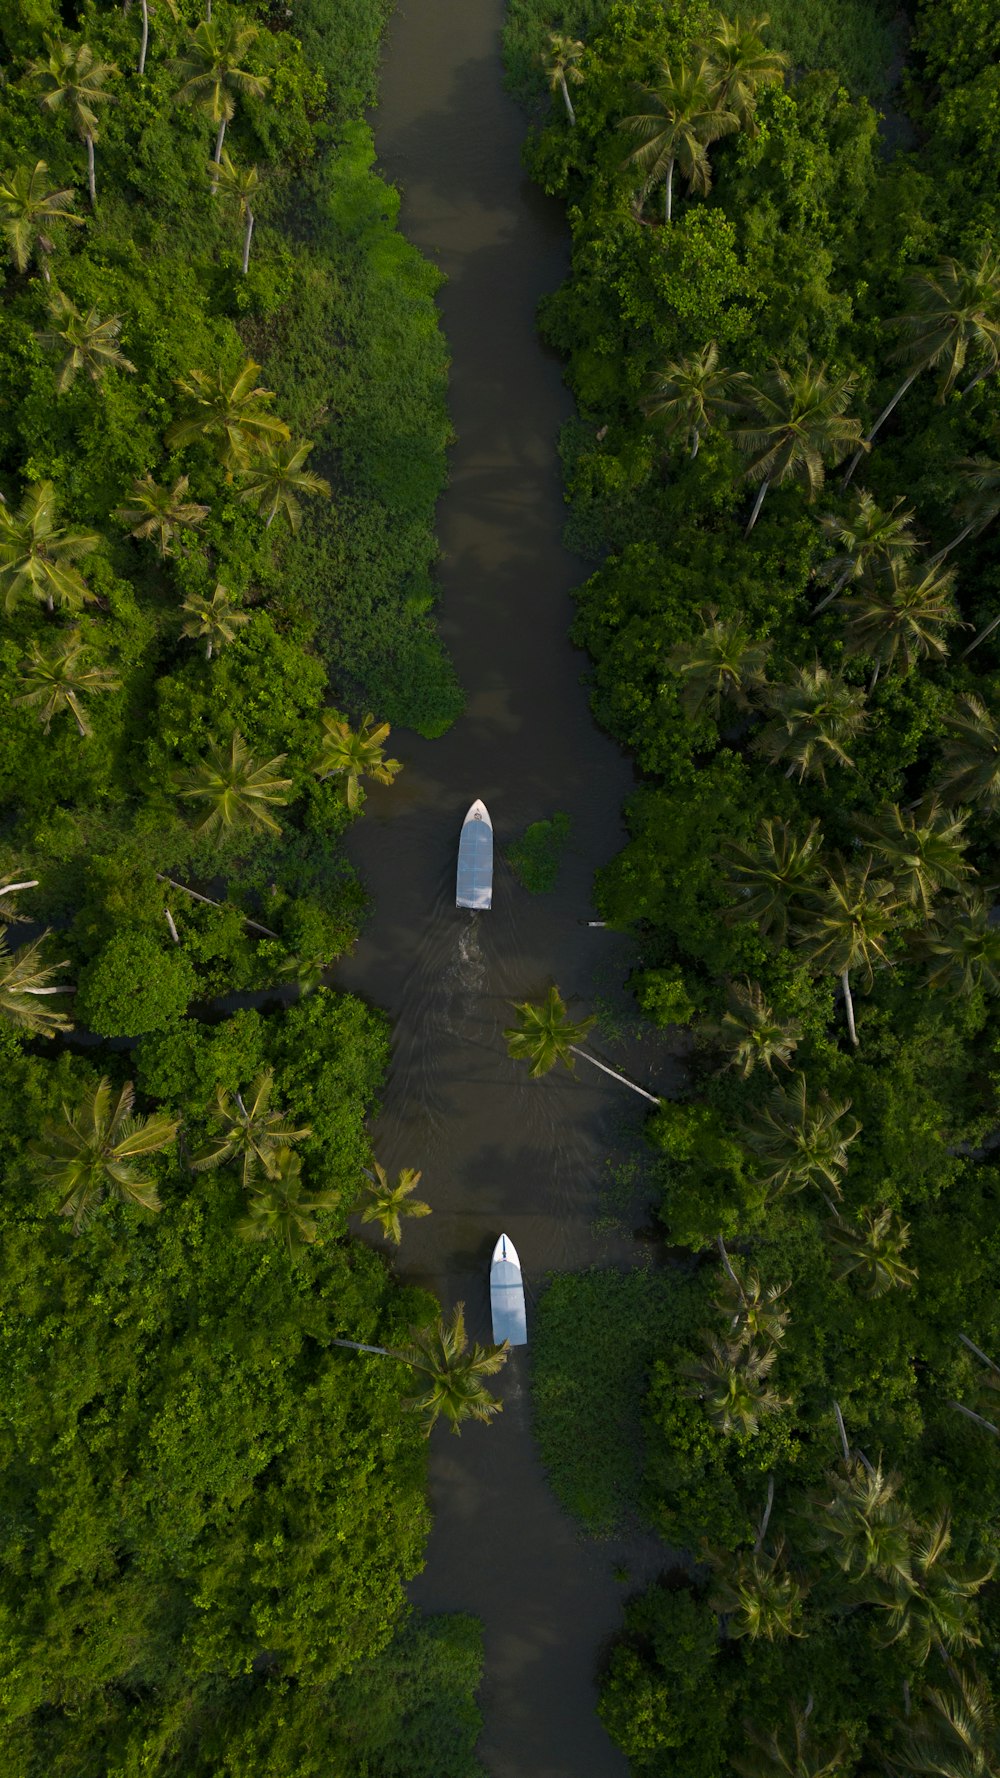 two boats are in the middle of a river surrounded by palm trees